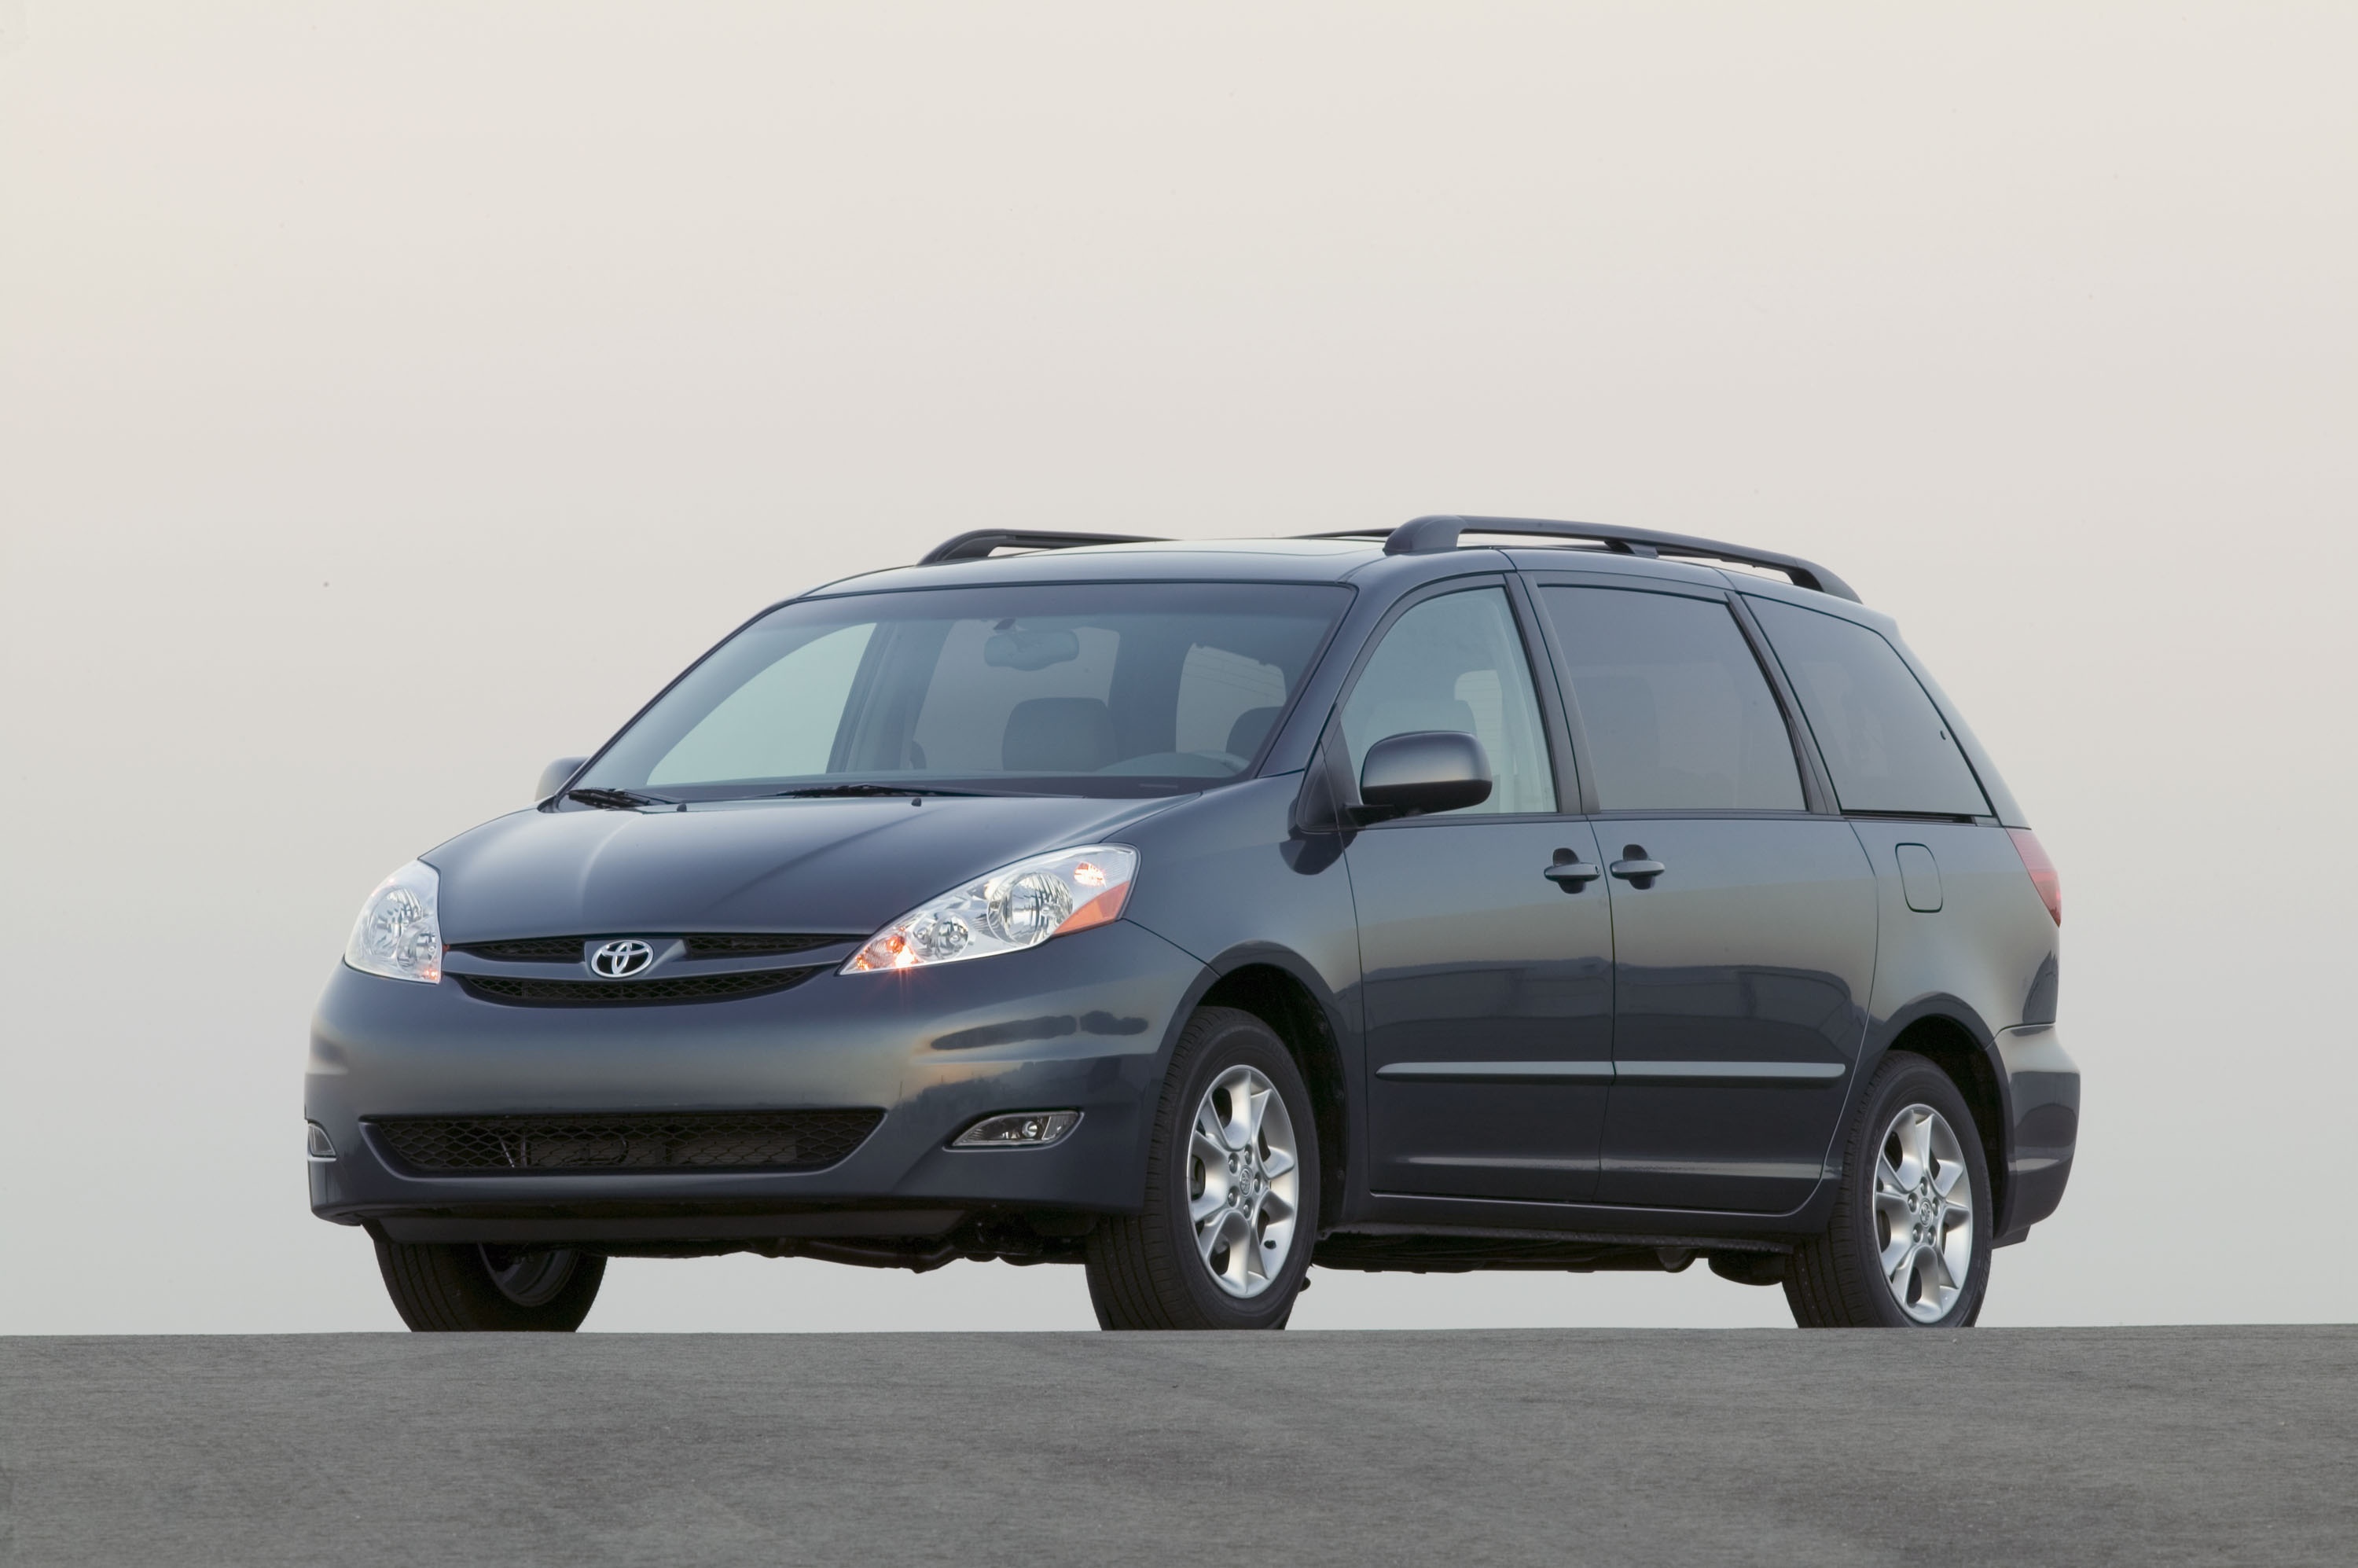 Used 2009 Toyota Sienna for Sale in San Diego CA with Photos  CarGurus